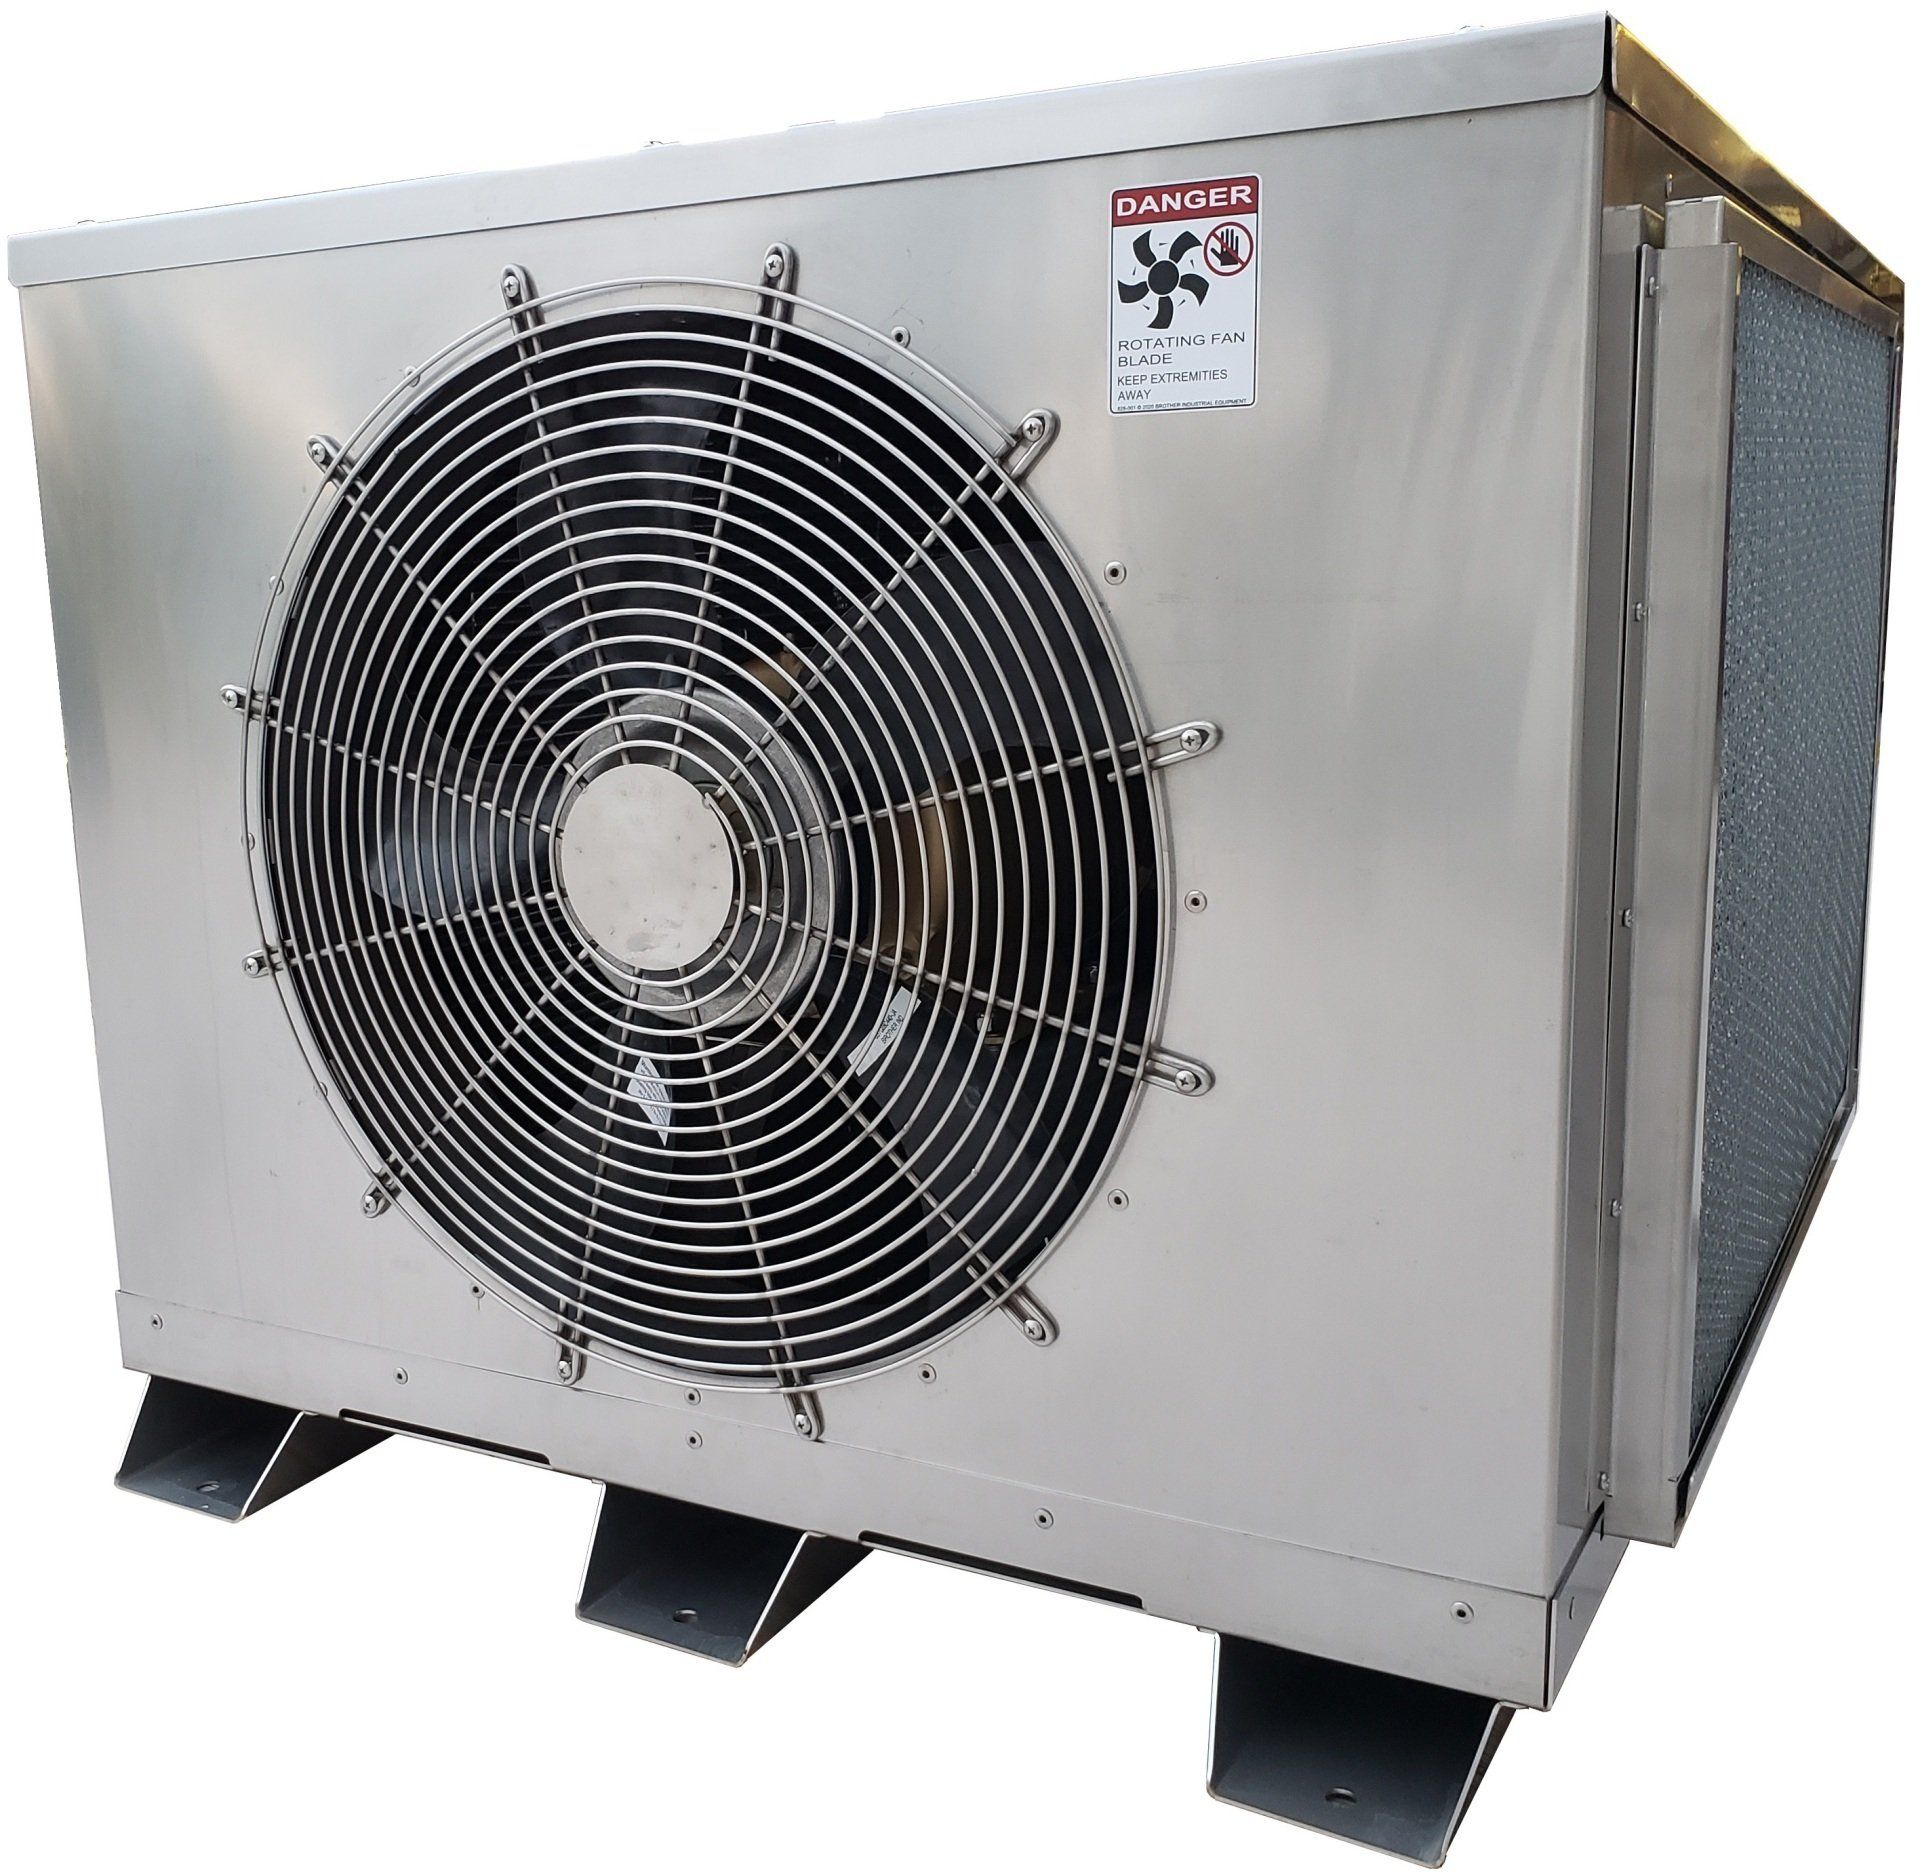 AIR COOLED CHILLER FANS, WATER CHILLER, BROTHER GLYCOL, GROW SPACE CHILLER